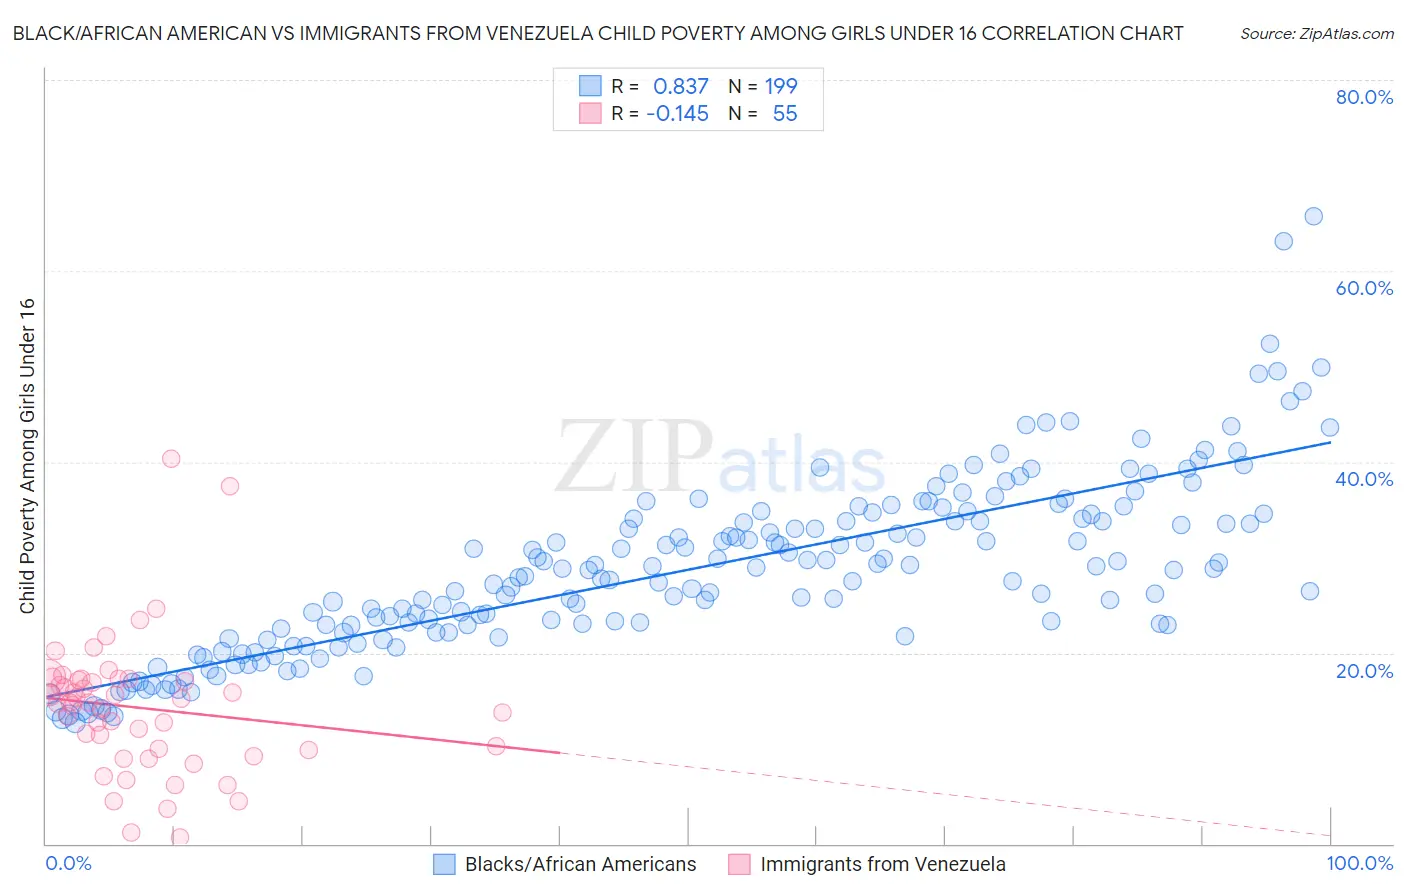 Black/African American vs Immigrants from Venezuela Child Poverty Among Girls Under 16